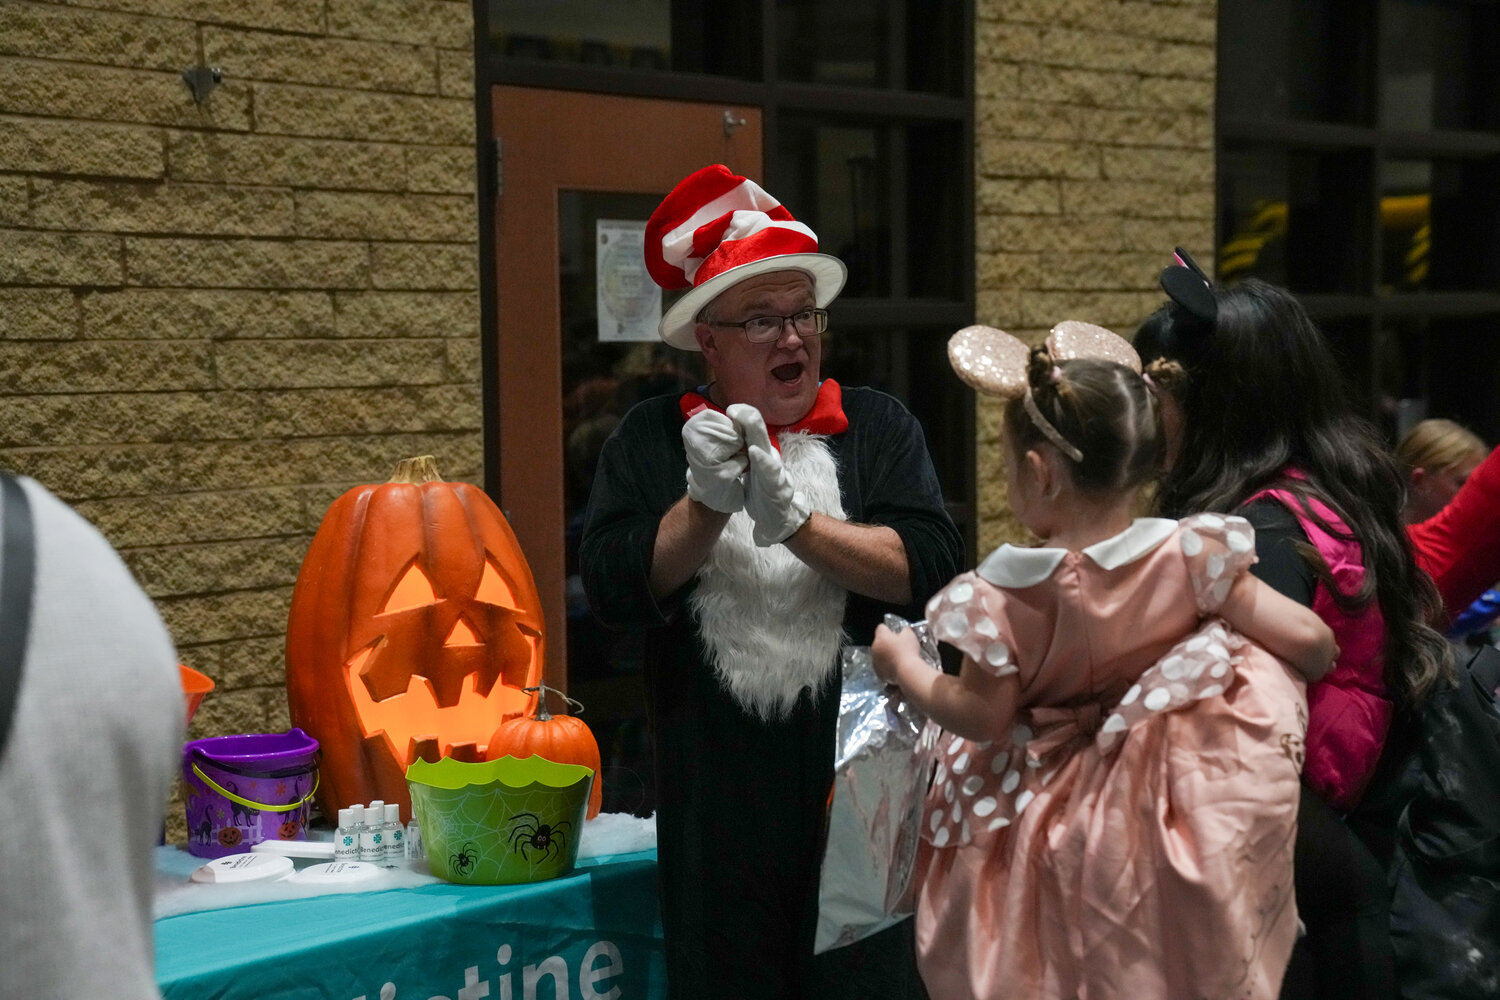 Many of the donors for the Community Halloween Party on Friday set up booths. Here is Rob Halberg of Benedictine Living dressed as the Cat in the Hat having some fun with visitors.